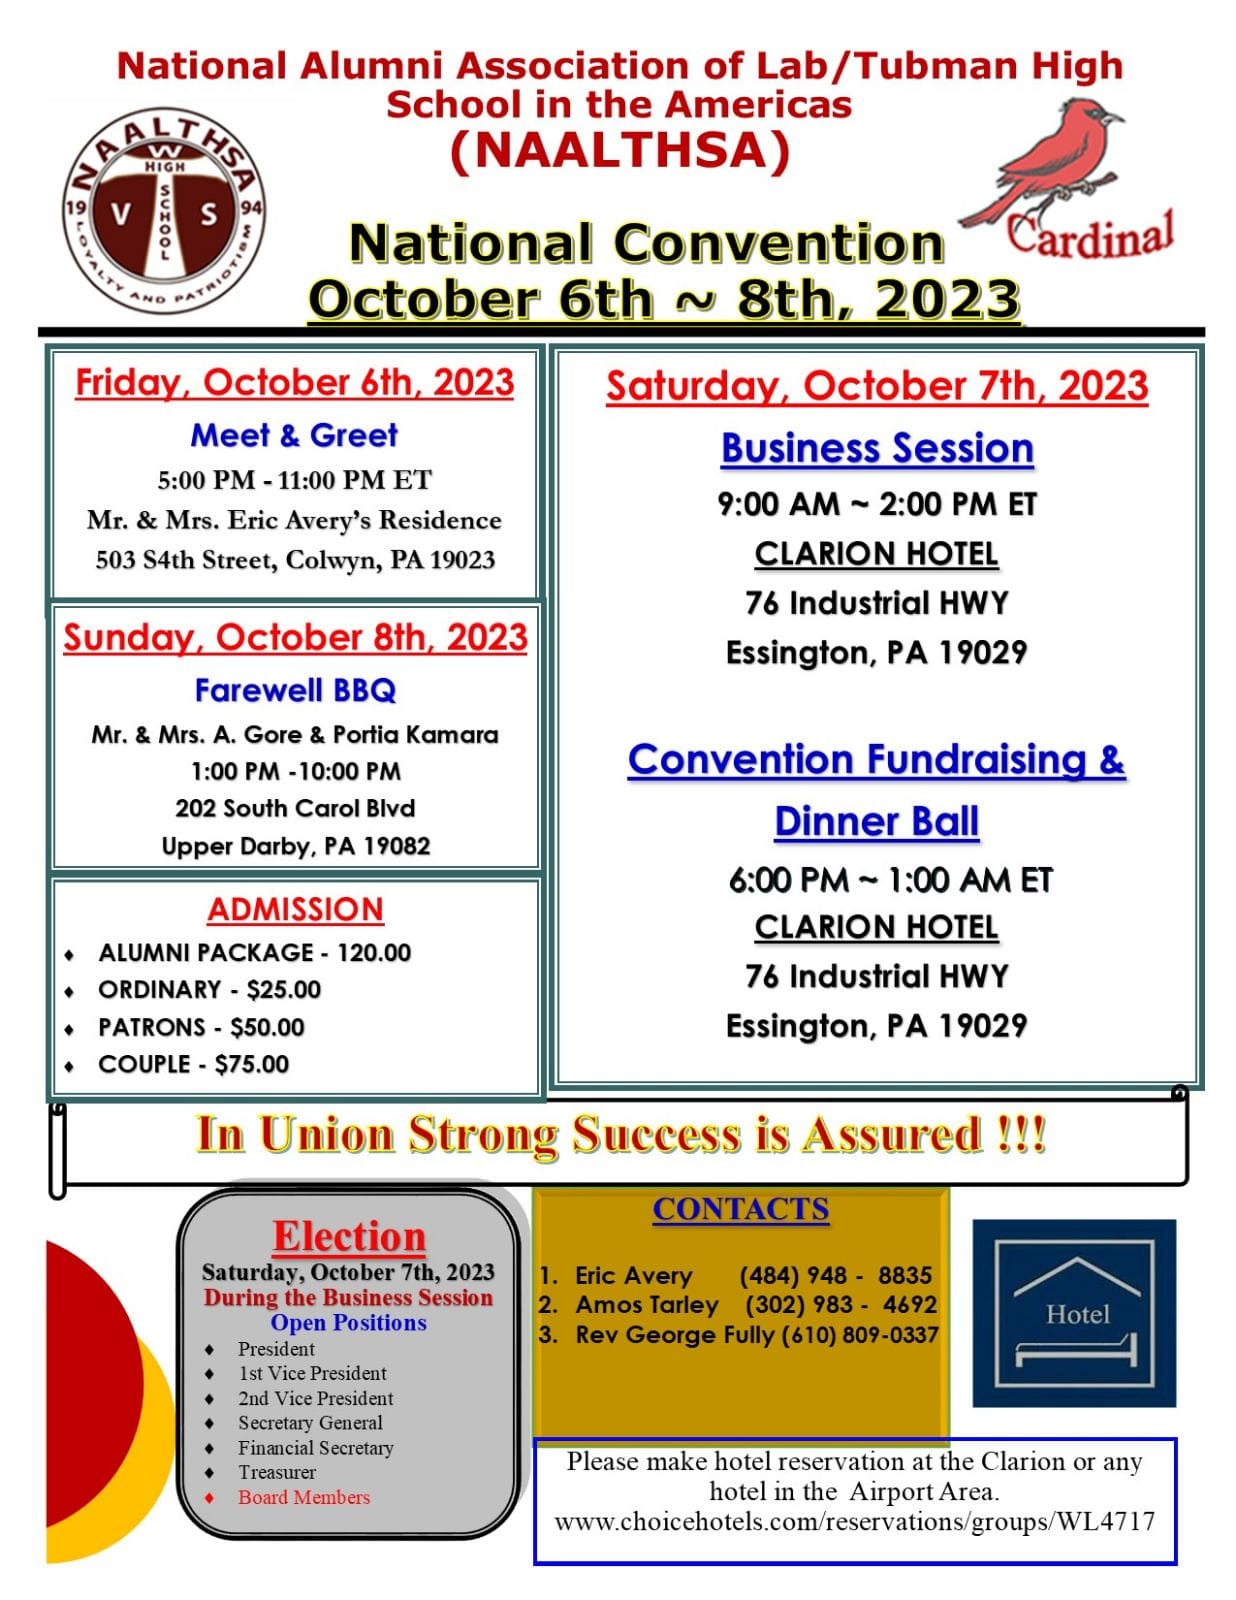 2023 NAALTHSA National Convention